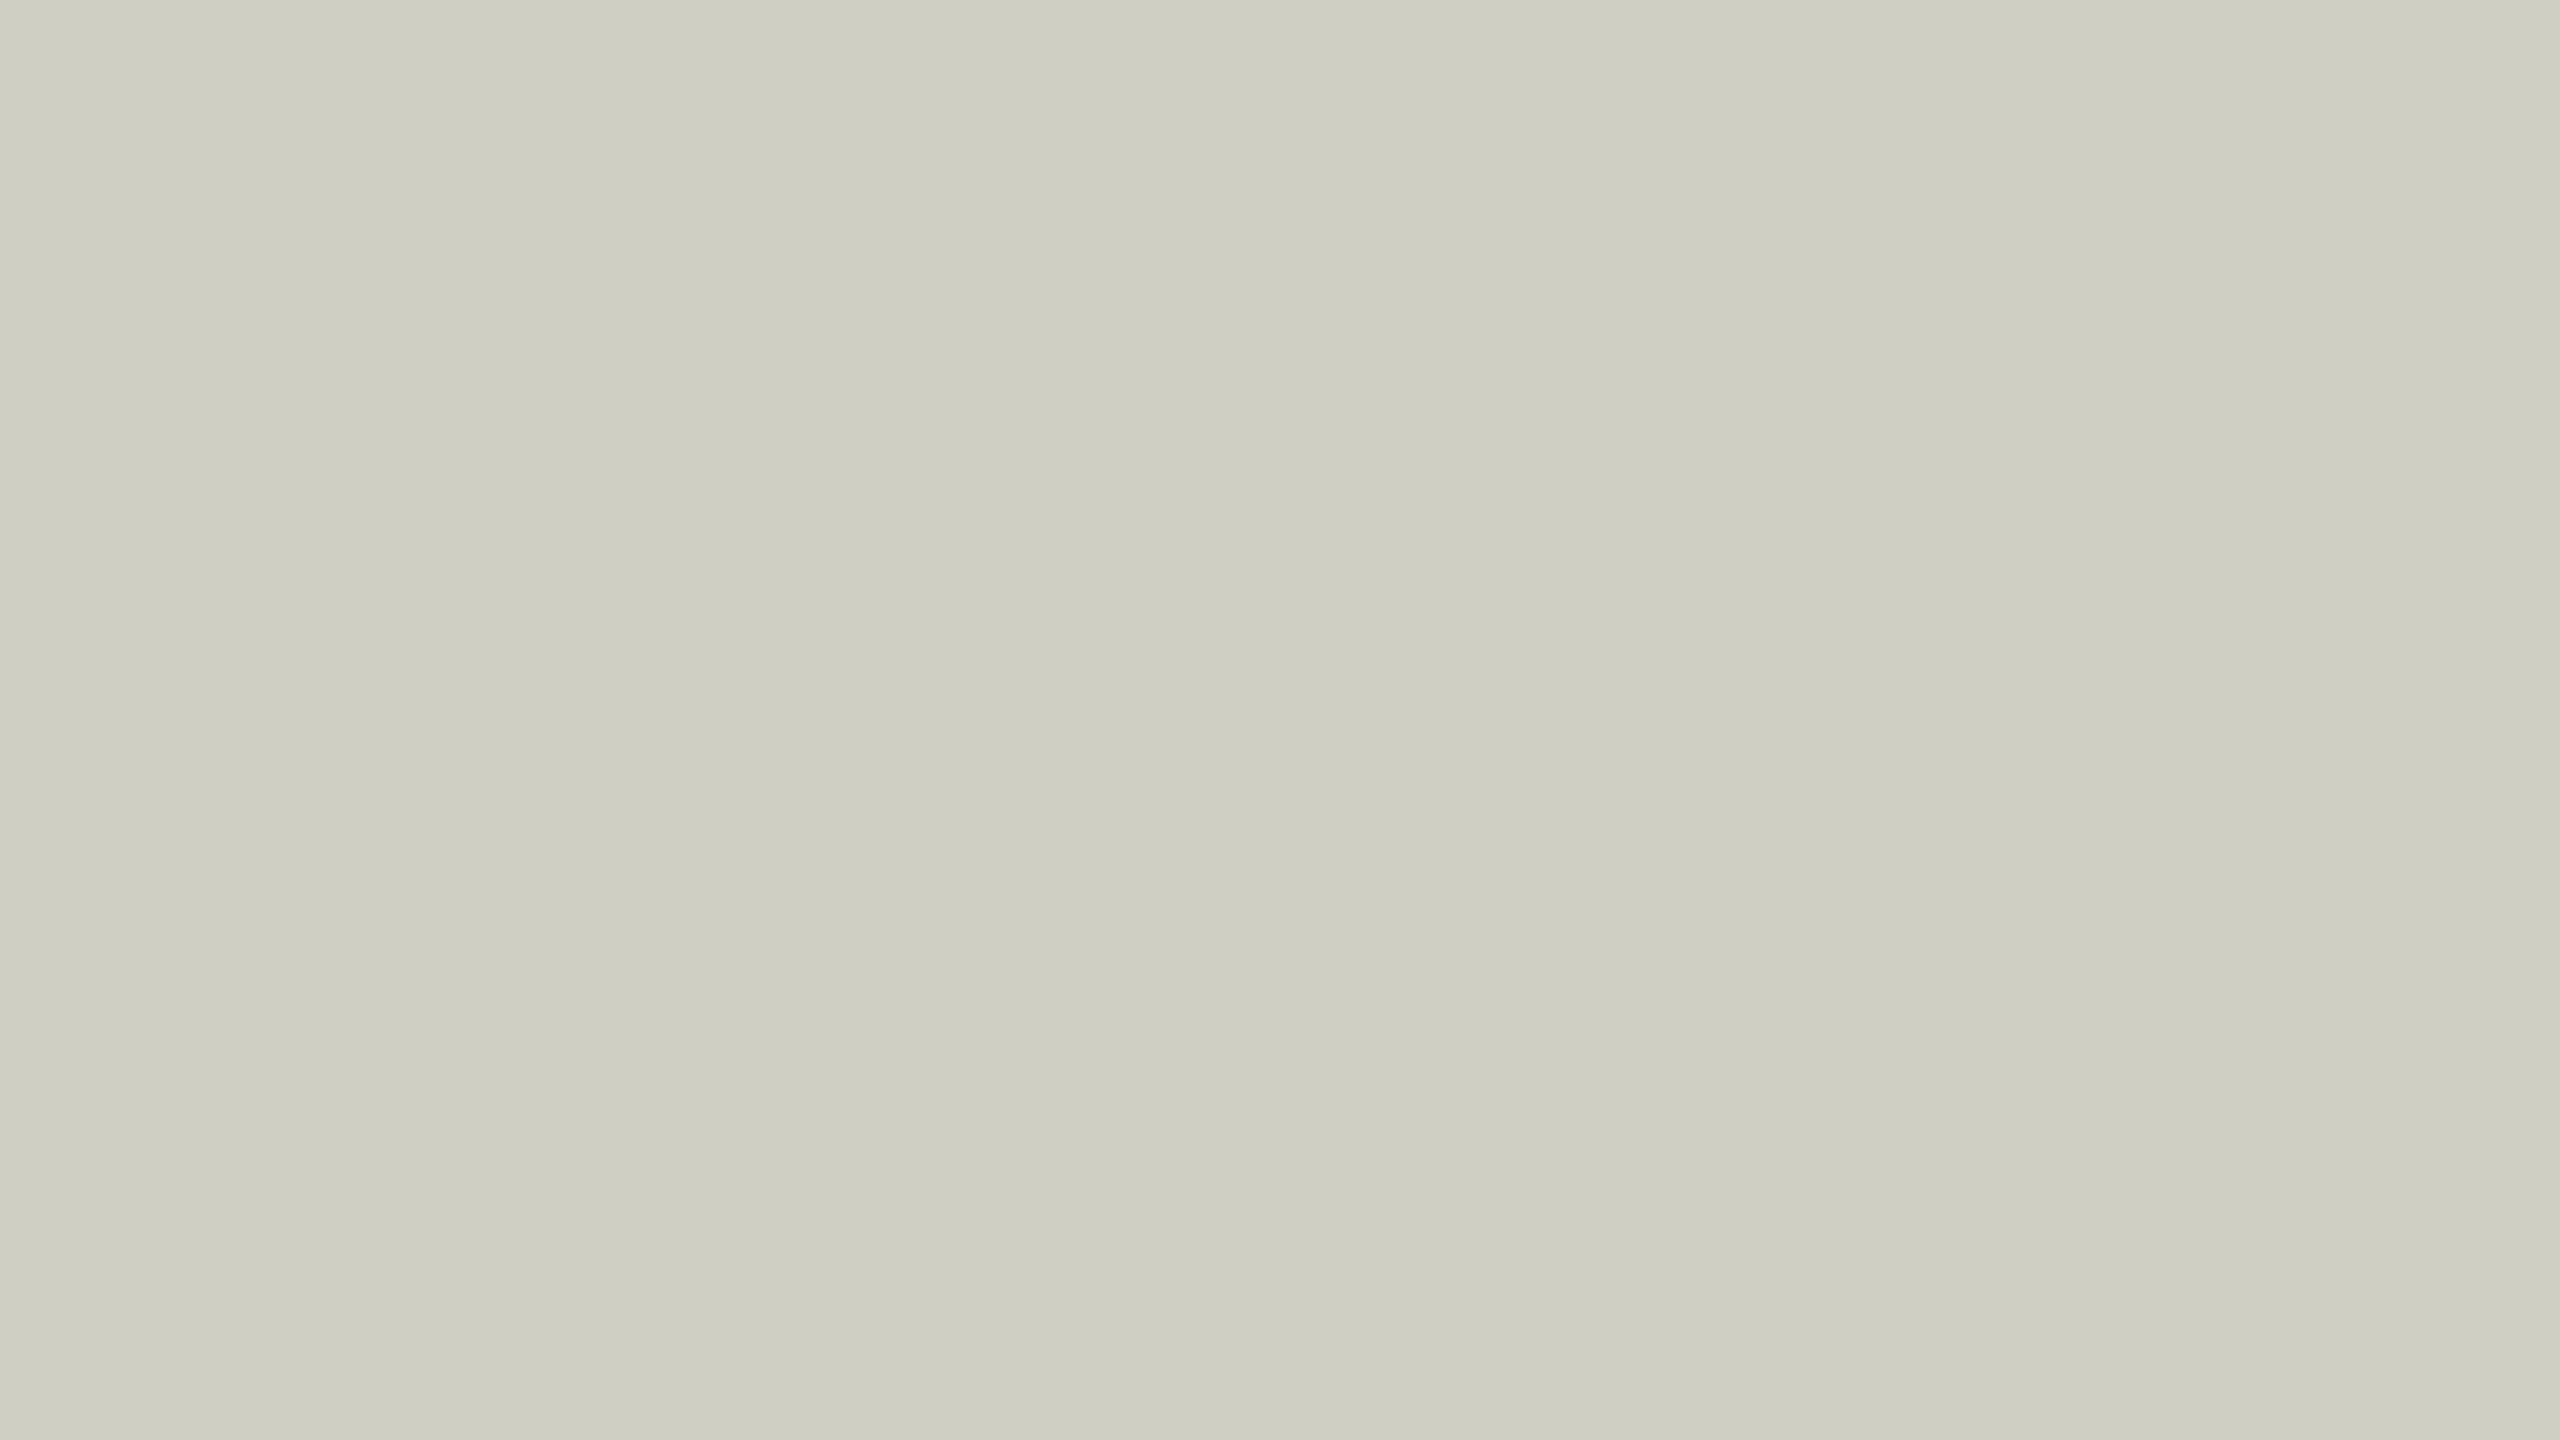 2560x1440 Pastel Gray Solid Color Background